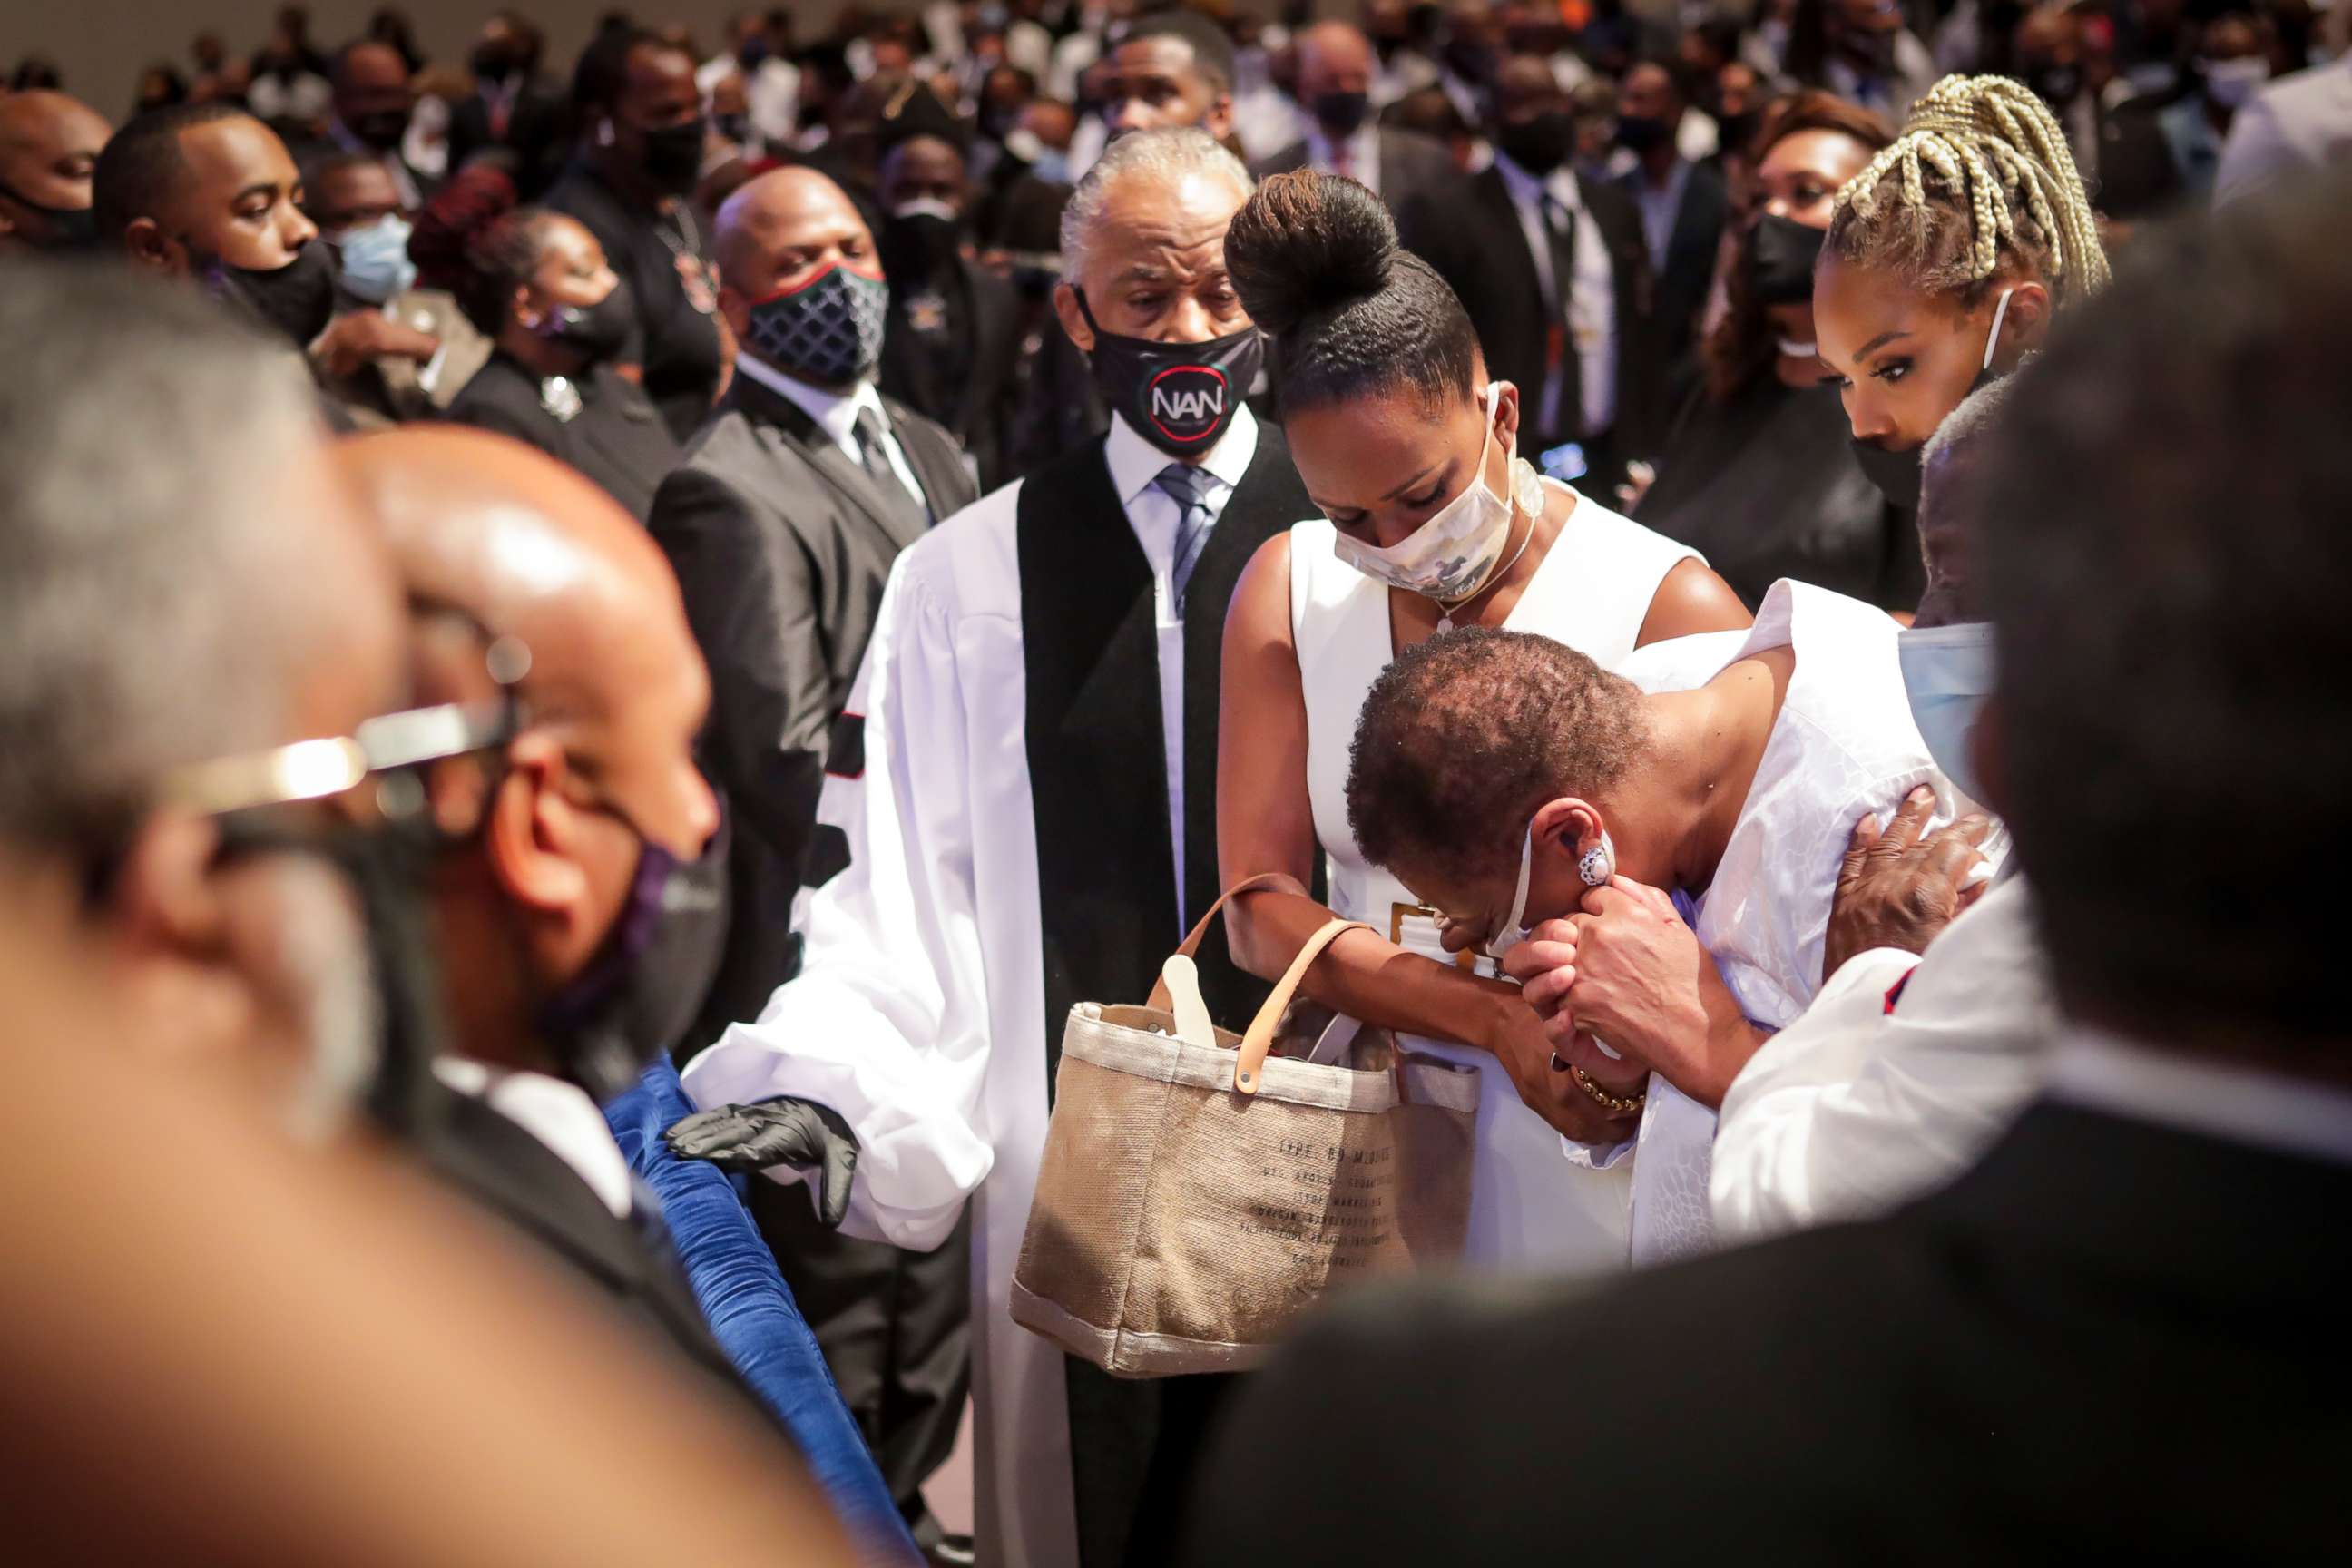 PHOTO: Mourners react as they look at the casket as the extended family processes into the private funeral for George Floyd at The Fountain of Praise church on June 9, 2020 in Houston, Texas.